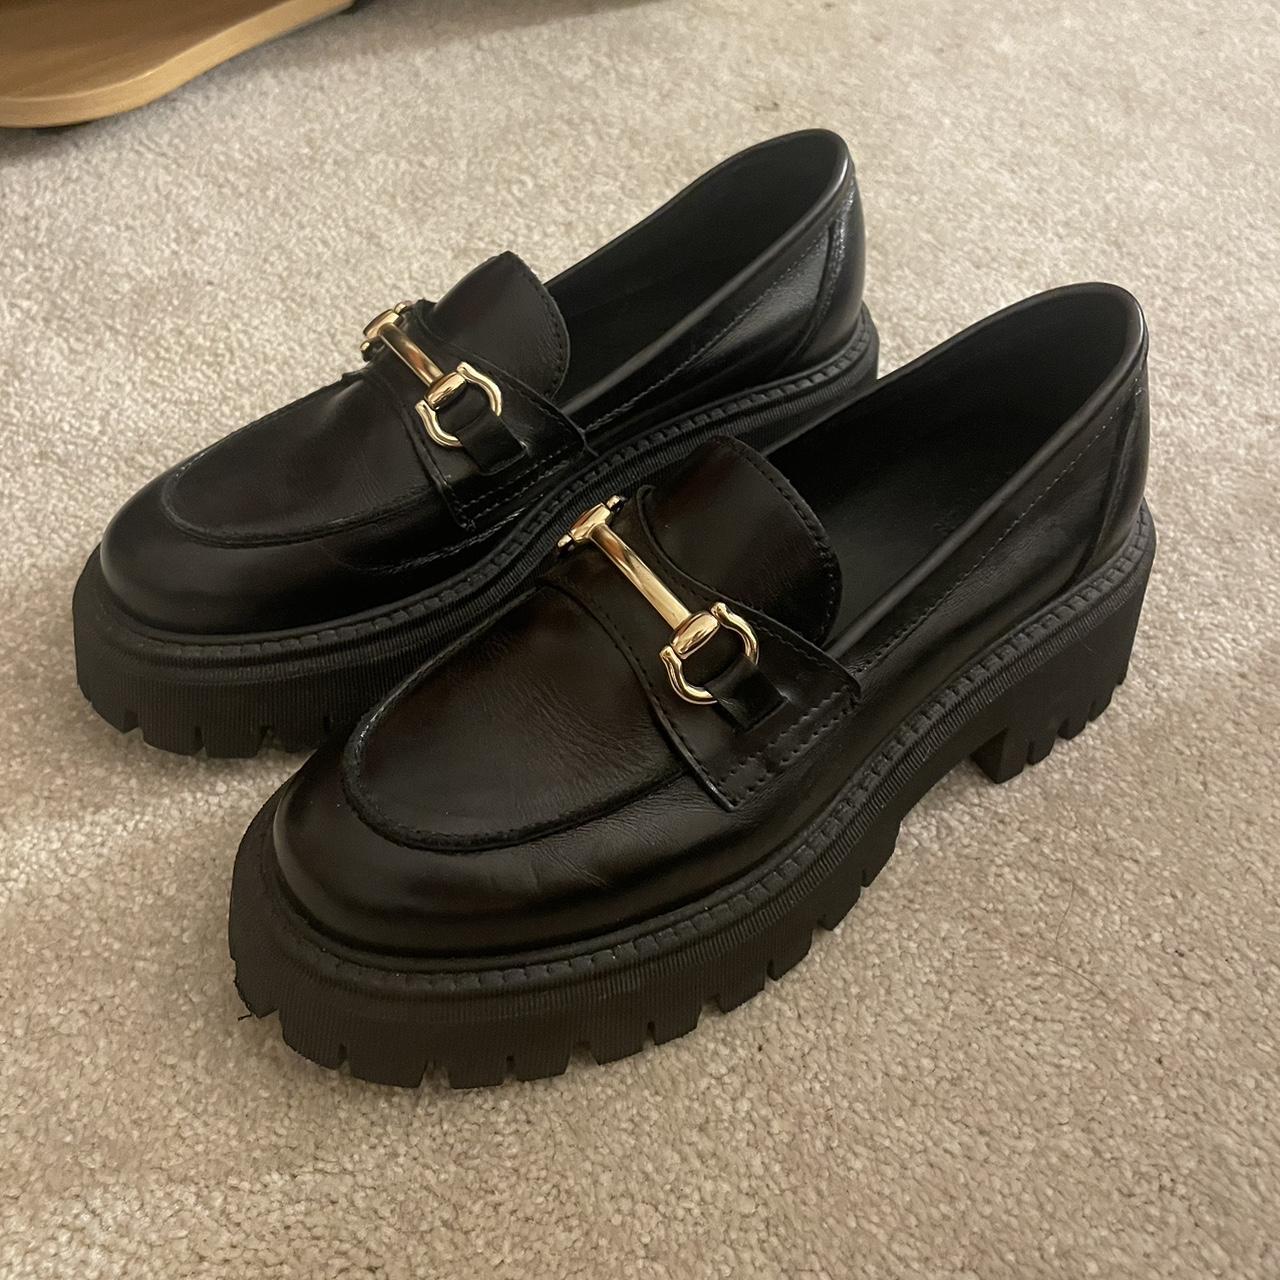 Urban outfitters platform loafers, size 38💖 Worn a... - Depop